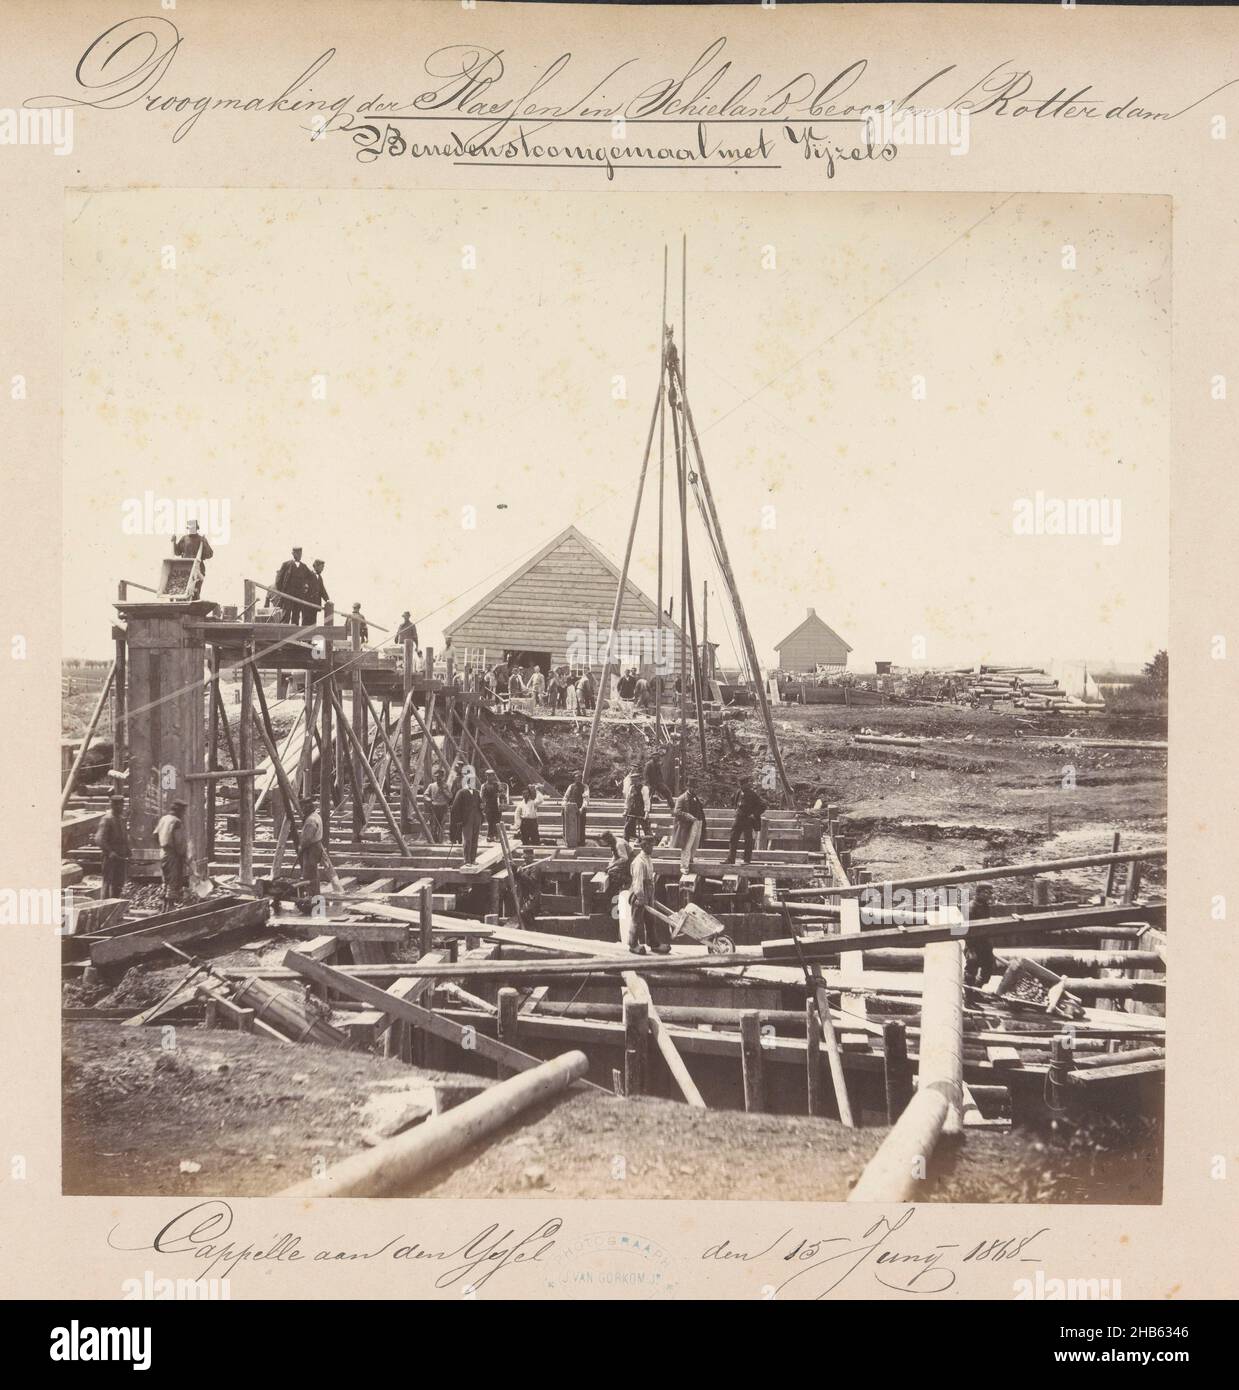 Lower steam pumping station with jacks, Cappelle aan den IJssel den 15 Junij 1868 (title on object), Drying of the ponds in Schieland east of Rotterdam (series title on object), Steam pumping station at Capelle aan den IJssel on 15 June 1868. Part of a series of ten photographs of the 1867-1869 reclamation of the ponds in Schieland east of Rotterdam., Jacobus van Gorkom jr. (mentioned on object), Rotterdam, 15-Jun-1868, photographic support, cardboard, albumen print, height 231 mm × width 252 mm Stock Photo